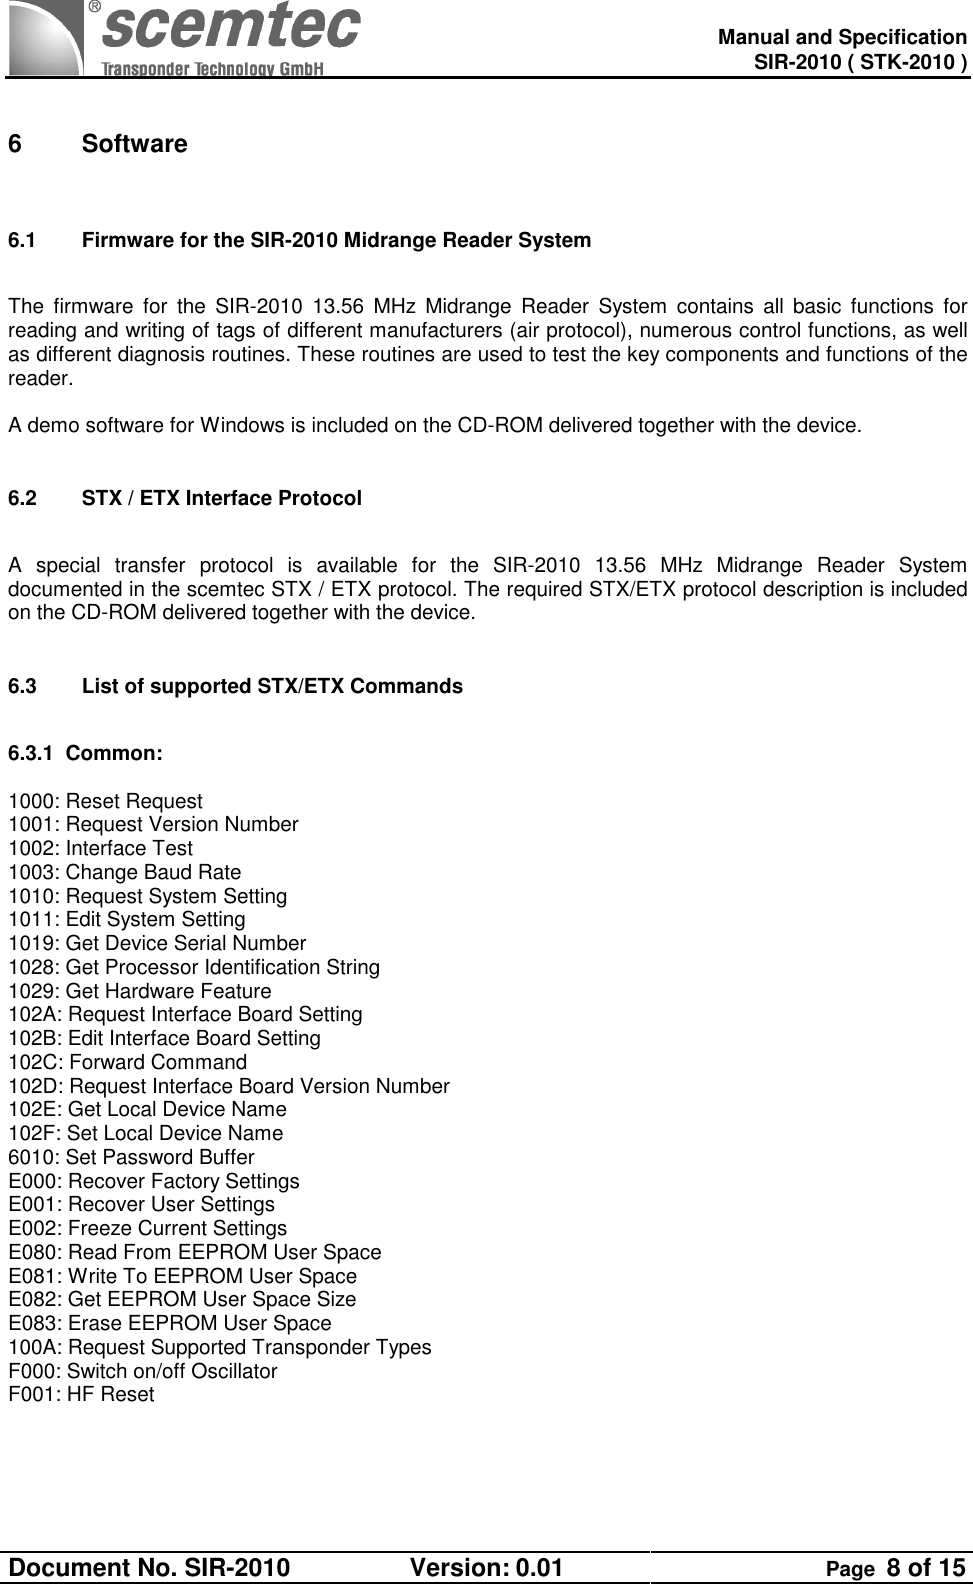   Manual and Specification SIR-2010 ( STK-2010 ) Document No. SIR-2010  Version: 0.01  Page  8 of 15   6  Software  6.1  Firmware for the SIR-2010 Midrange Reader System     The  firmware  for  the  SIR-2010  13.56  MHz  Midrange  Reader  System  contains  all  basic  functions  for reading and writing of tags of different manufacturers (air protocol), numerous control functions, as well as different diagnosis routines. These routines are used to test the key components and functions of the reader.   A demo software for Windows is included on the CD-ROM delivered together with the device.  6.2  STX / ETX Interface Protocol   A  special  transfer  protocol  is  available  for  the  SIR-2010  13.56  MHz  Midrange  Reader  System documented in the scemtec STX / ETX protocol. The required STX/ETX protocol description is included on the CD-ROM delivered together with the device.  6.3  List of supported STX/ETX Commands  6.3.1  Common:  1000: Reset Request 1001: Request Version Number 1002: Interface Test 1003: Change Baud Rate 1010: Request System Setting 1011: Edit System Setting 1019: Get Device Serial Number 1028: Get Processor Identification String 1029: Get Hardware Feature 102A: Request Interface Board Setting 102B: Edit Interface Board Setting 102C: Forward Command 102D: Request Interface Board Version Number 102E: Get Local Device Name 102F: Set Local Device Name 6010: Set Password Buffer E000: Recover Factory Settings E001: Recover User Settings E002: Freeze Current Settings E080: Read From EEPROM User Space E081: Write To EEPROM User Space E082: Get EEPROM User Space Size E083: Erase EEPROM User Space 100A: Request Supported Transponder Types F000: Switch on/off Oscillator F001: HF Reset  